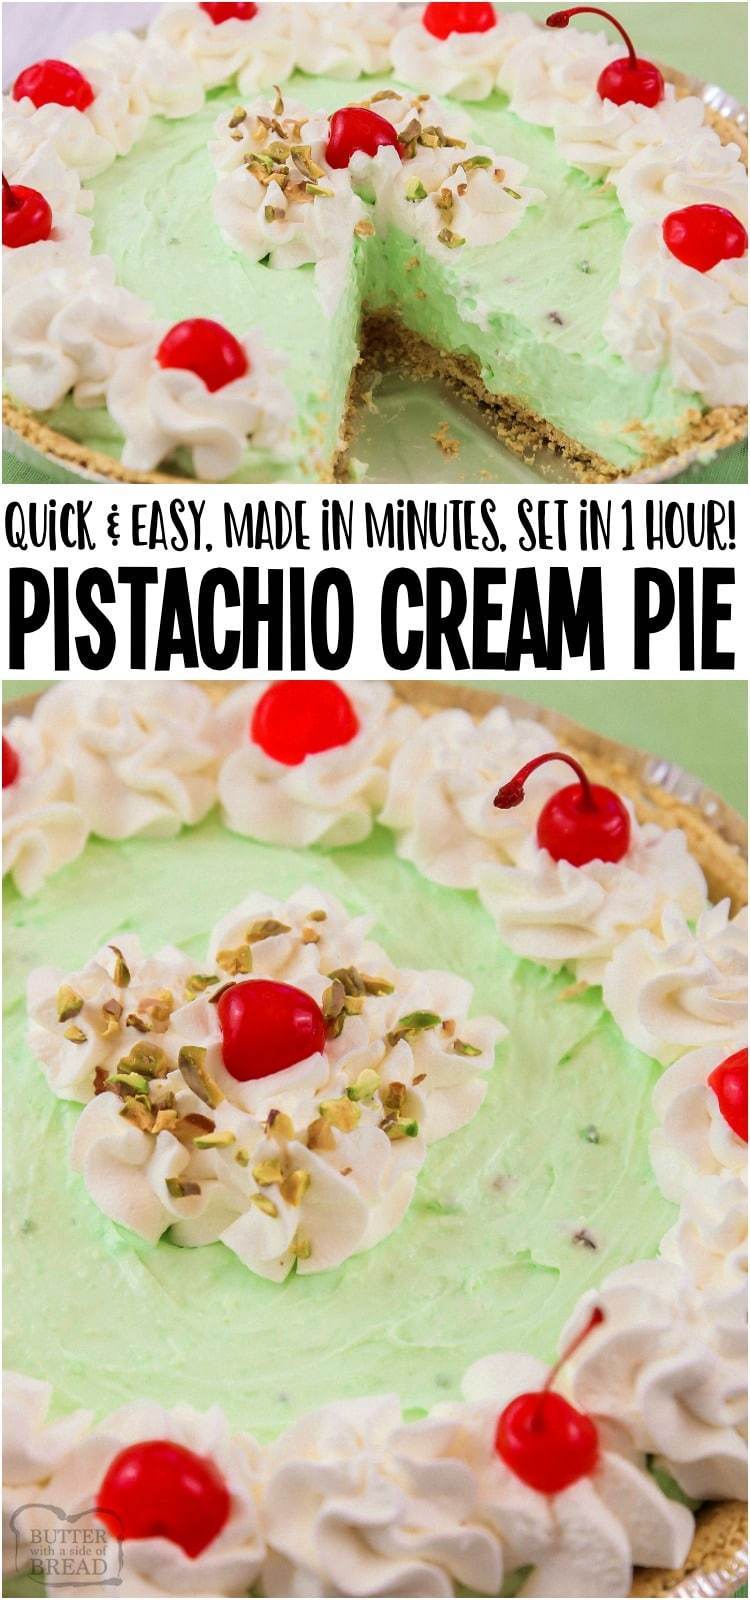 Easy Pistachio Cream Pie with just 5 ingredients and made in minutes! Ready to serve in an hour & perfectly sweet and creamy with delicious pistachio flavor. Perfect for St. Patrick's Day or anytime!